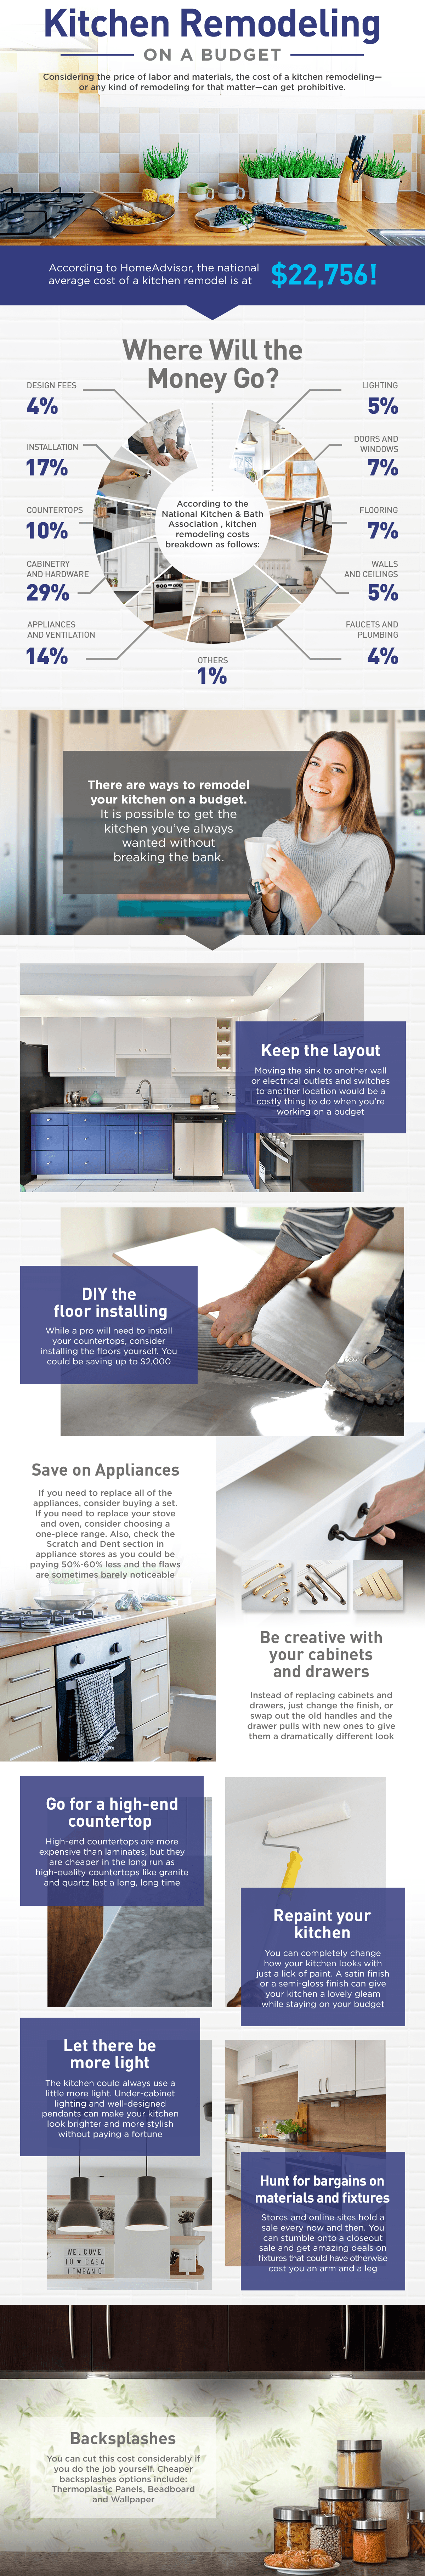 kitchen remodeling on a budget infographic